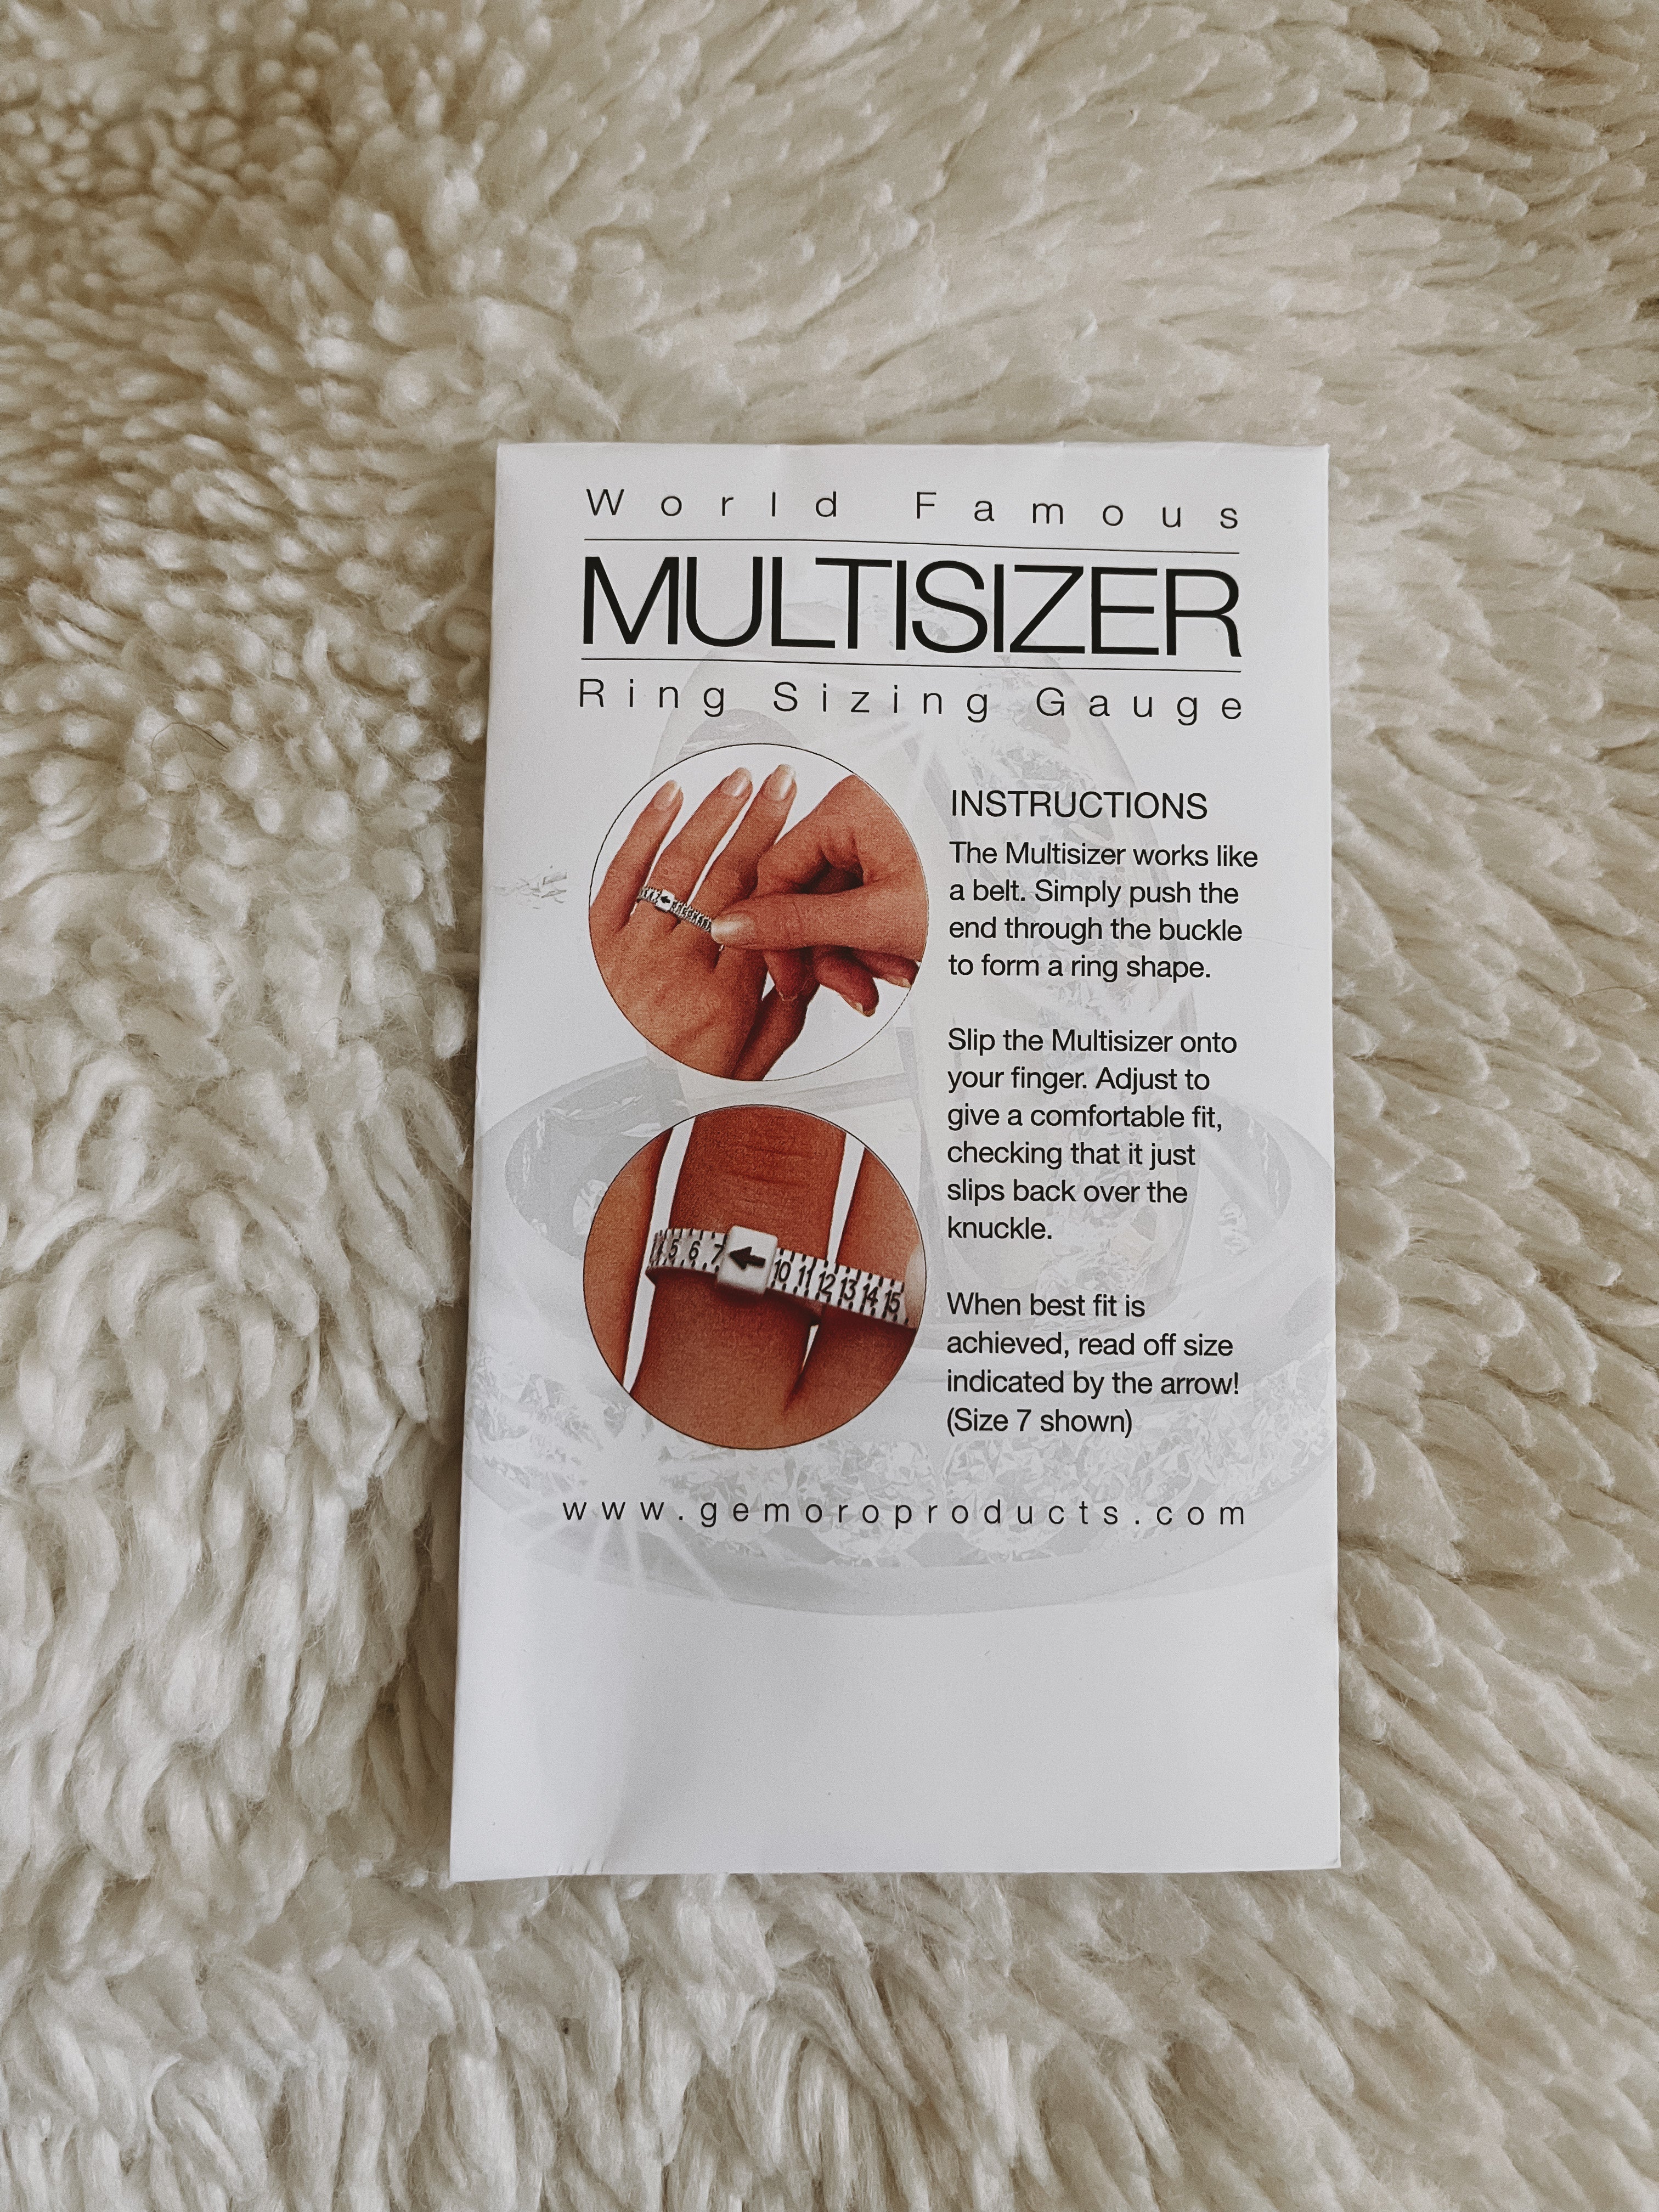 The packaging of the ring sizing tool, called a multisizer